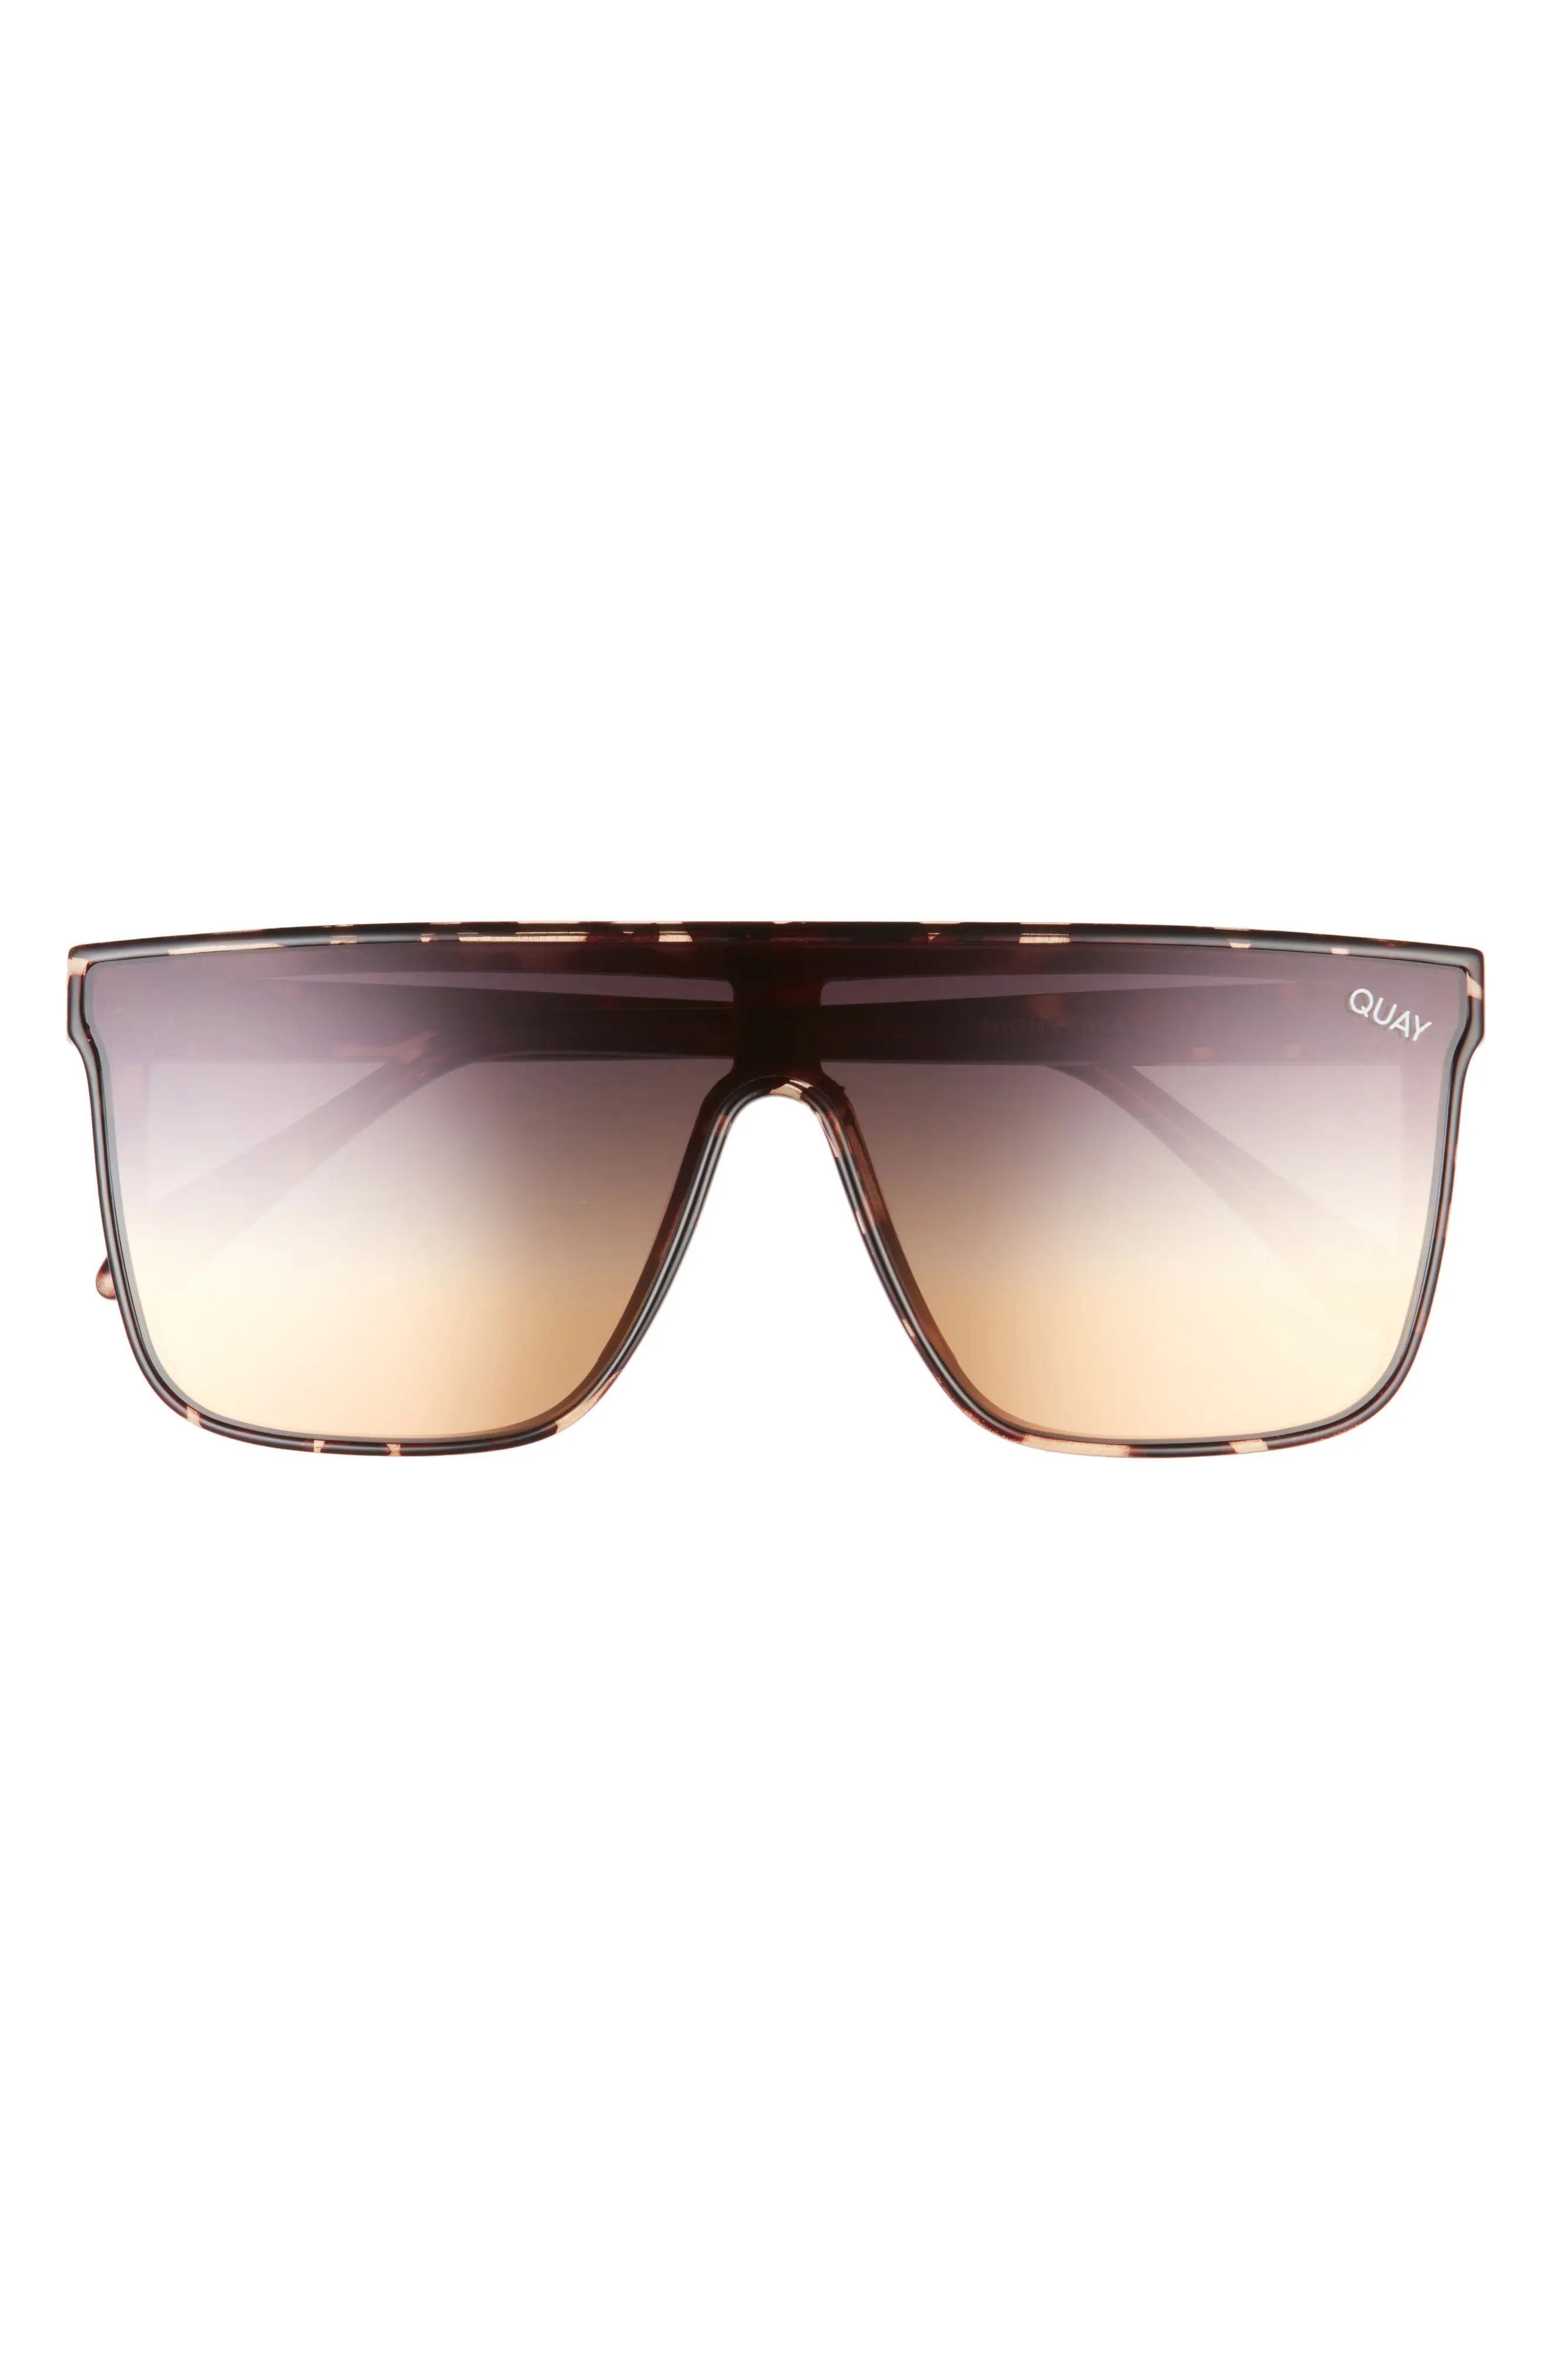 Quay Australia Night Fall 52mm Gradient Flat Top Sunglasses in Tortoise /Black To Gold at Nordstrom | Nordstrom